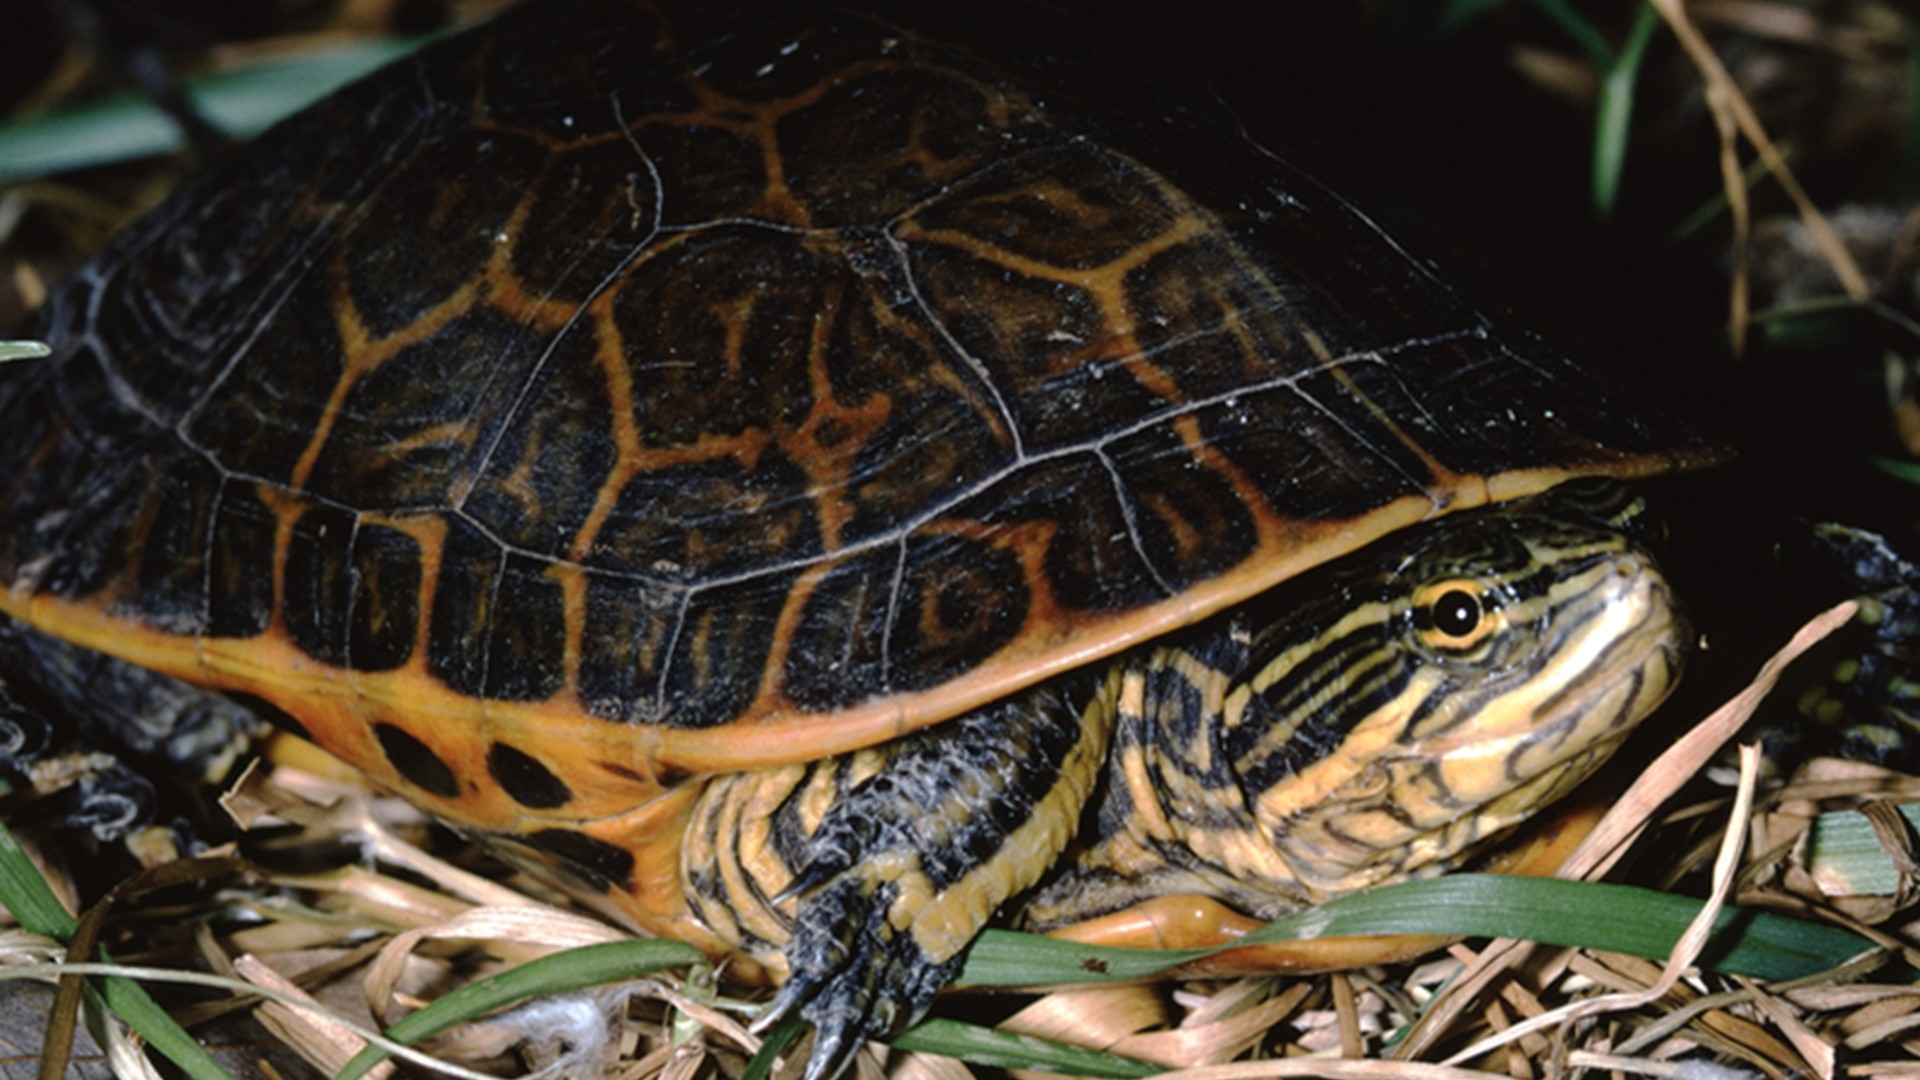 The Arkansas Game and Fish Commission is asking for help searching for a rare species of turtle found in the state: The western chicken turtle.